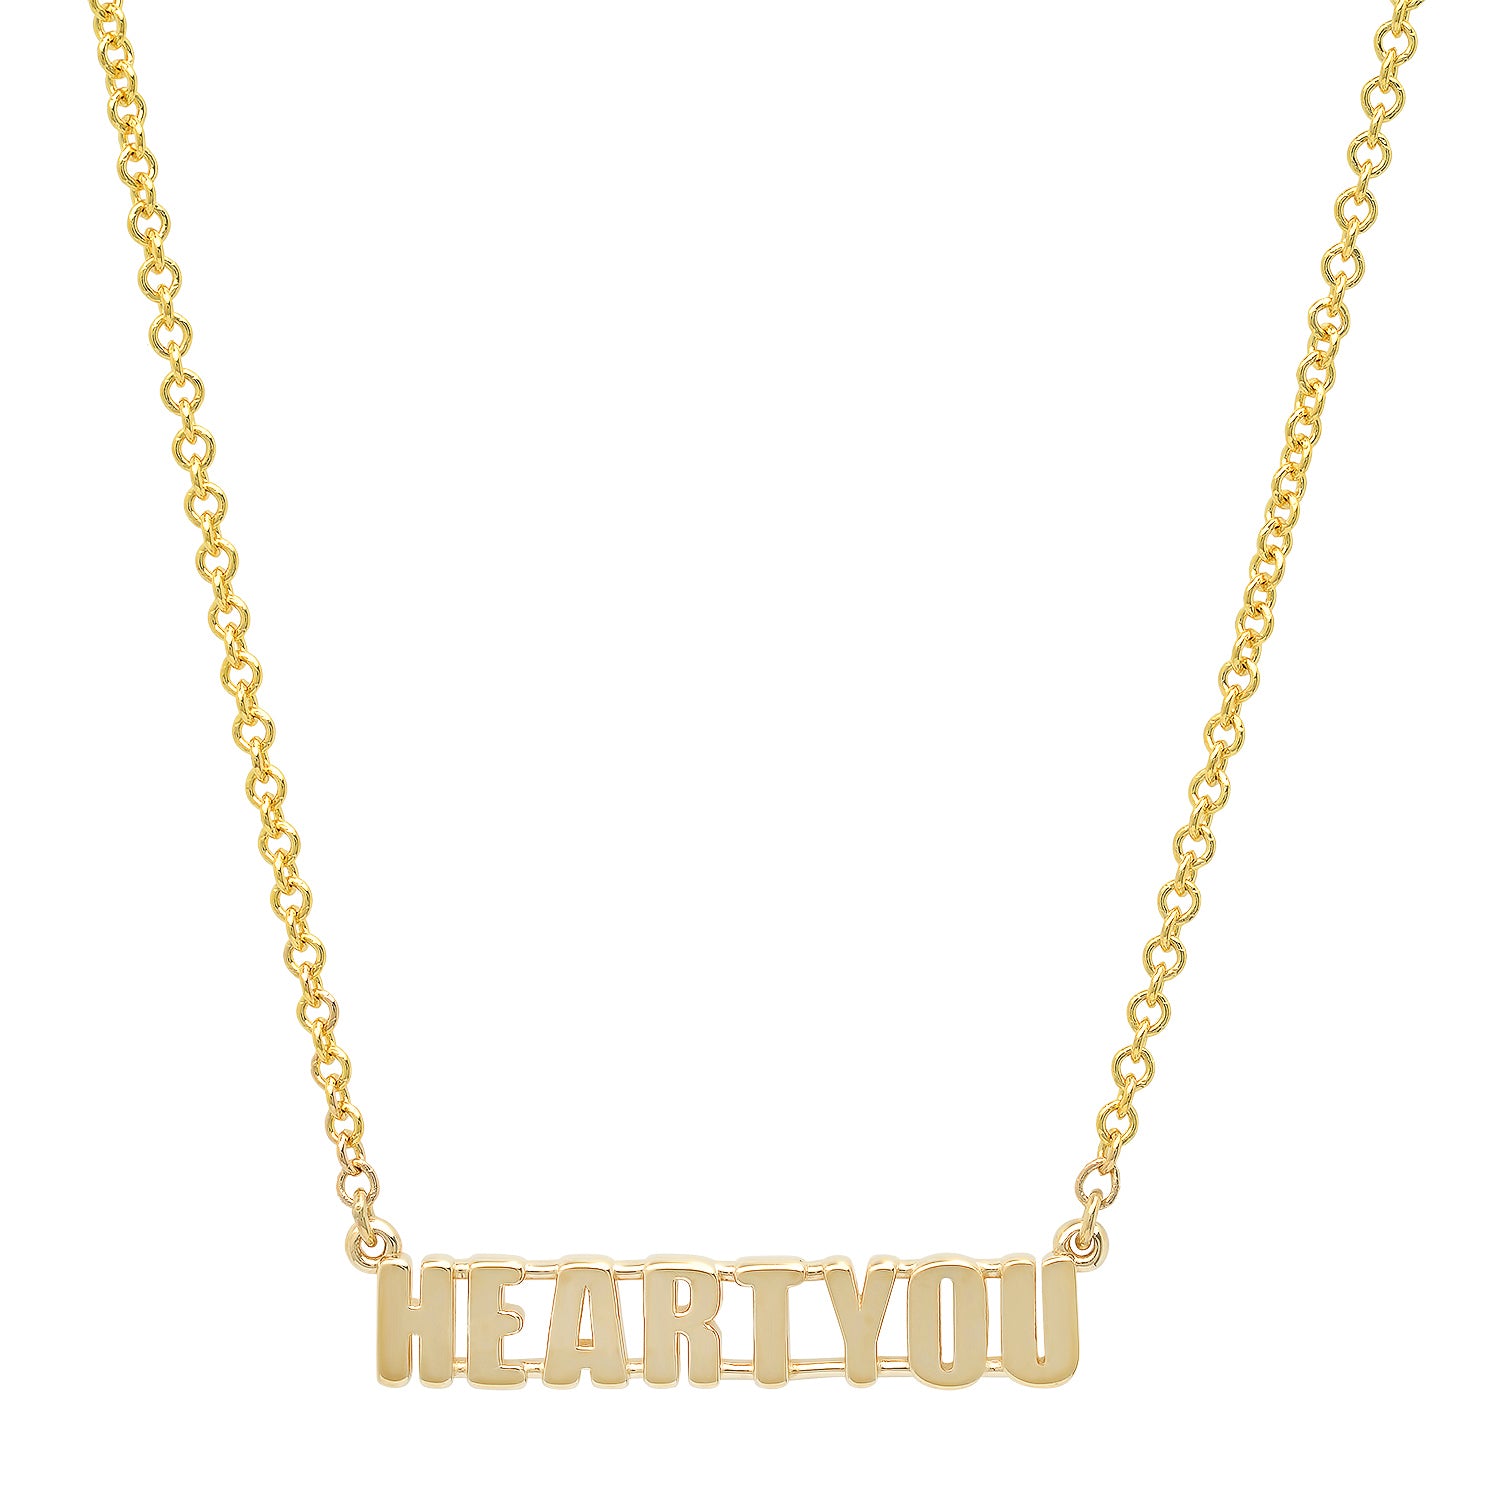 "Heart You" Necklace